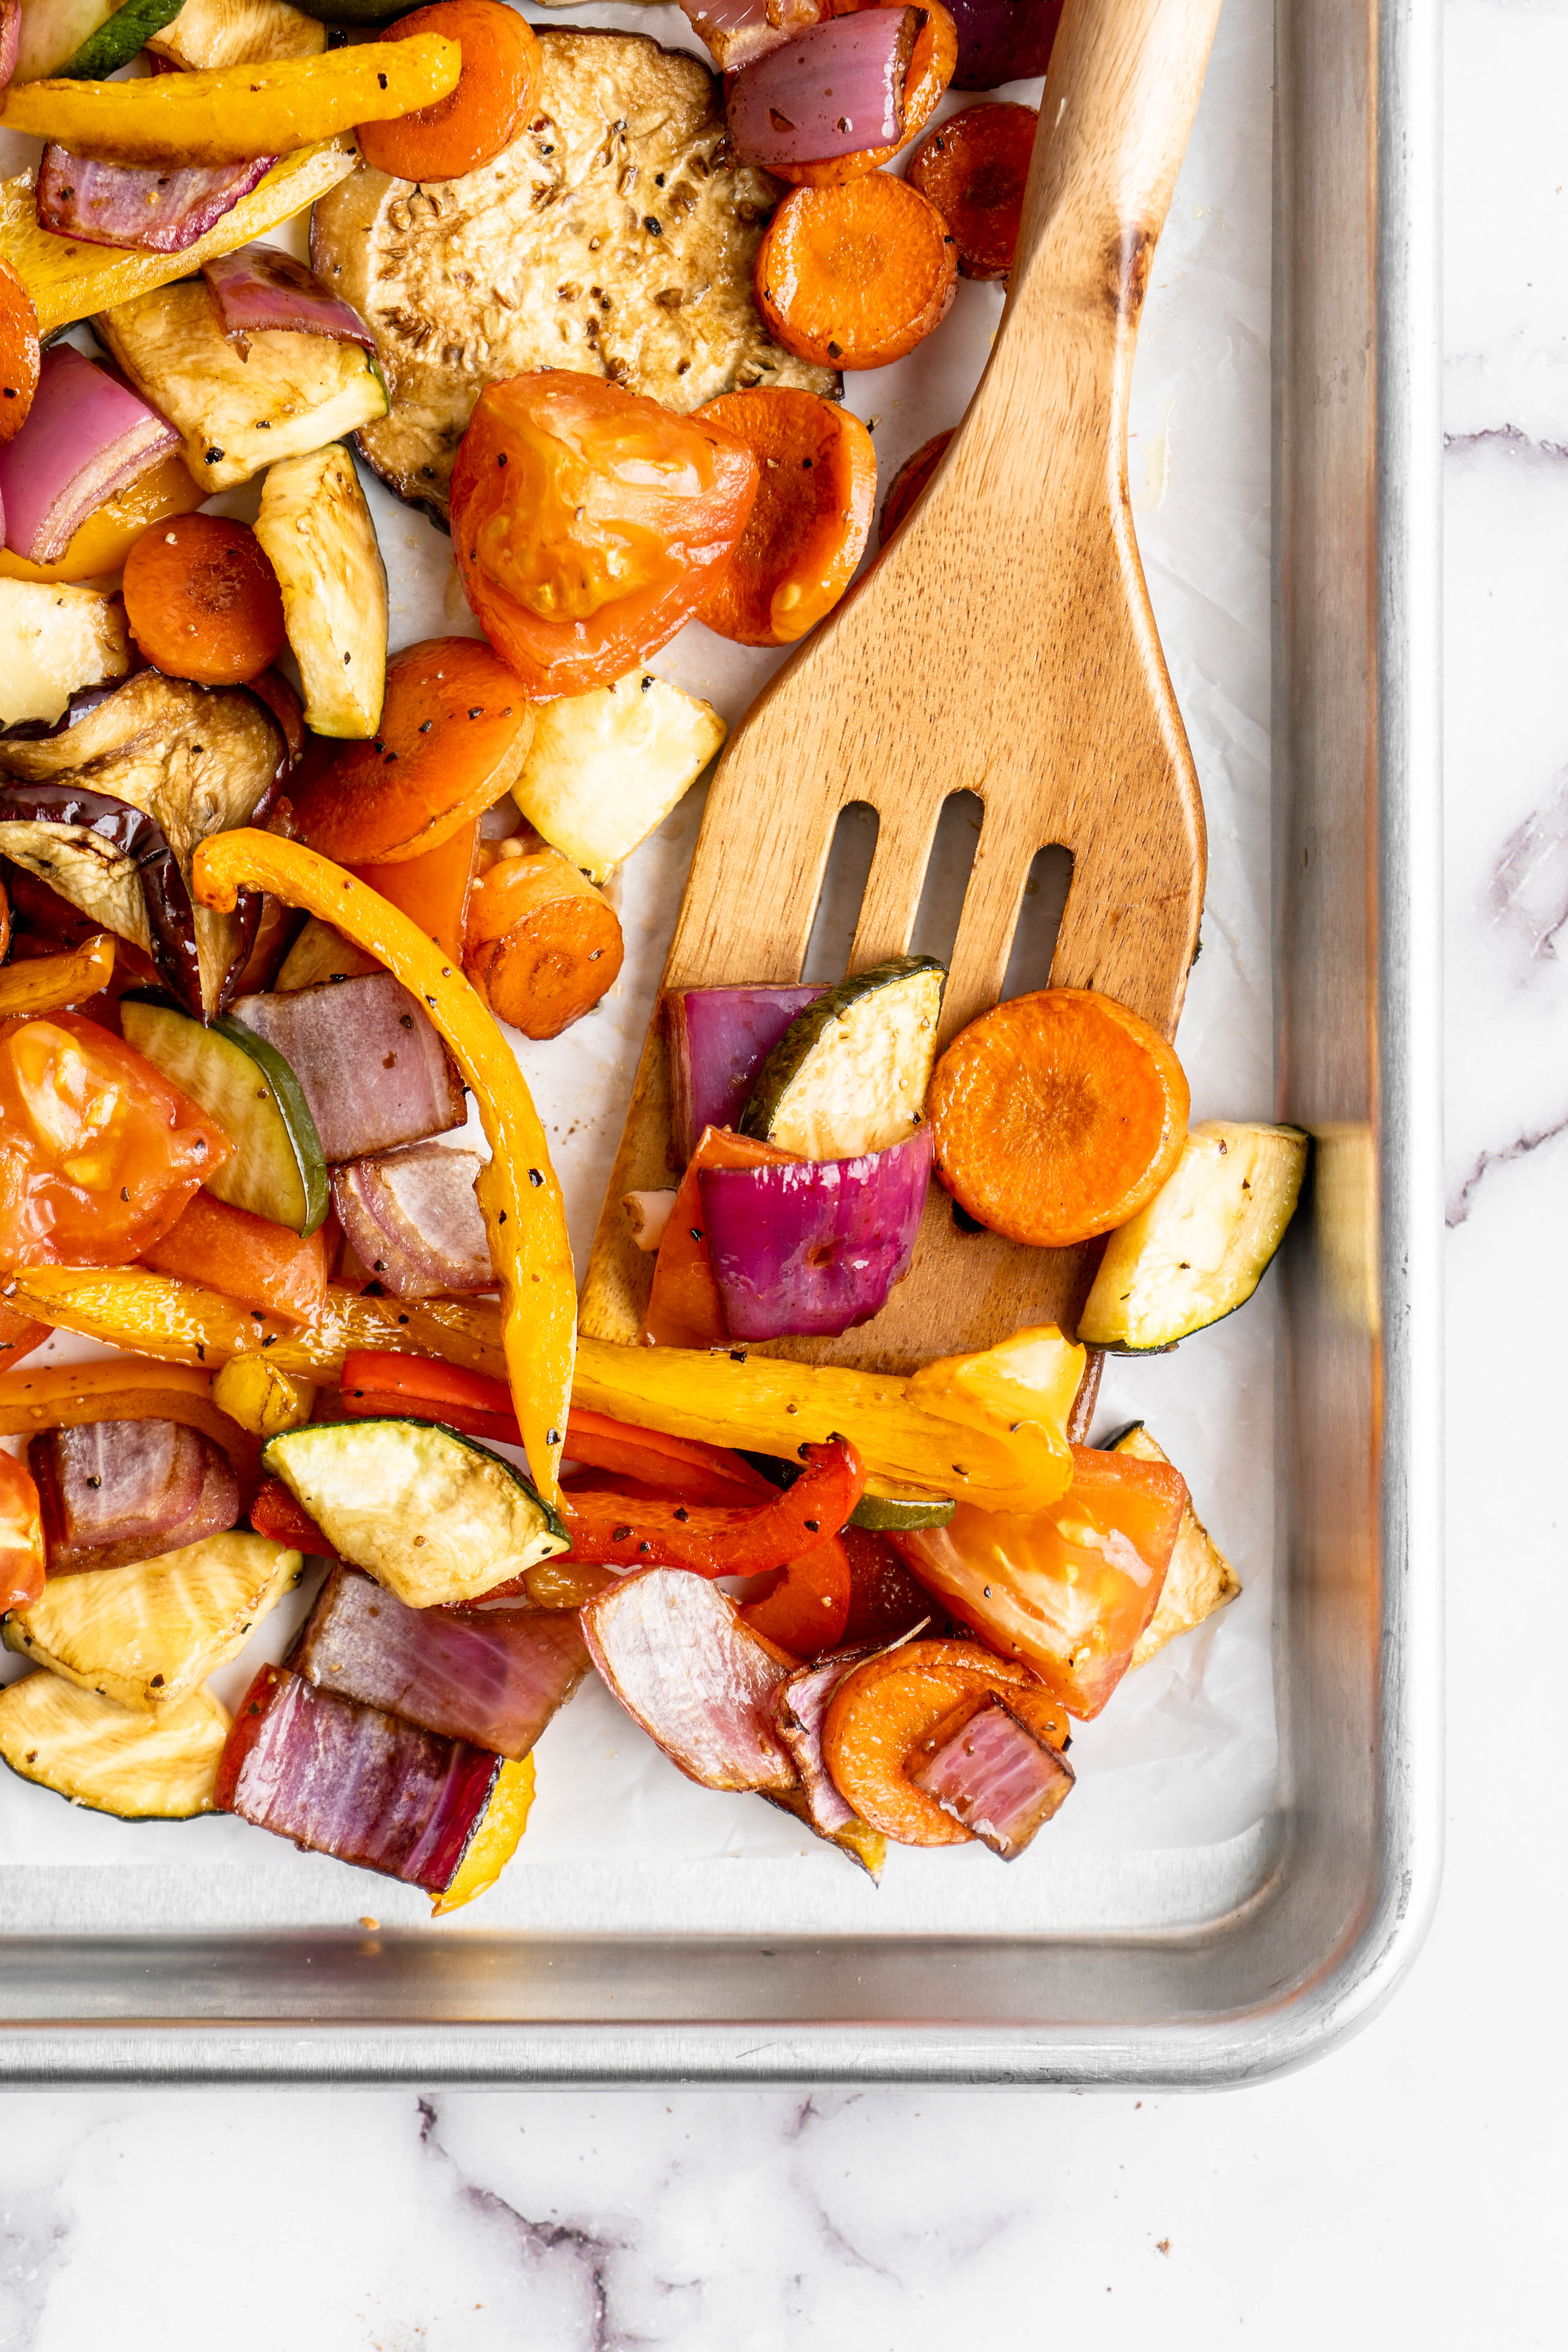 Wooden spoon lifting roasted vegetables from sheet pan